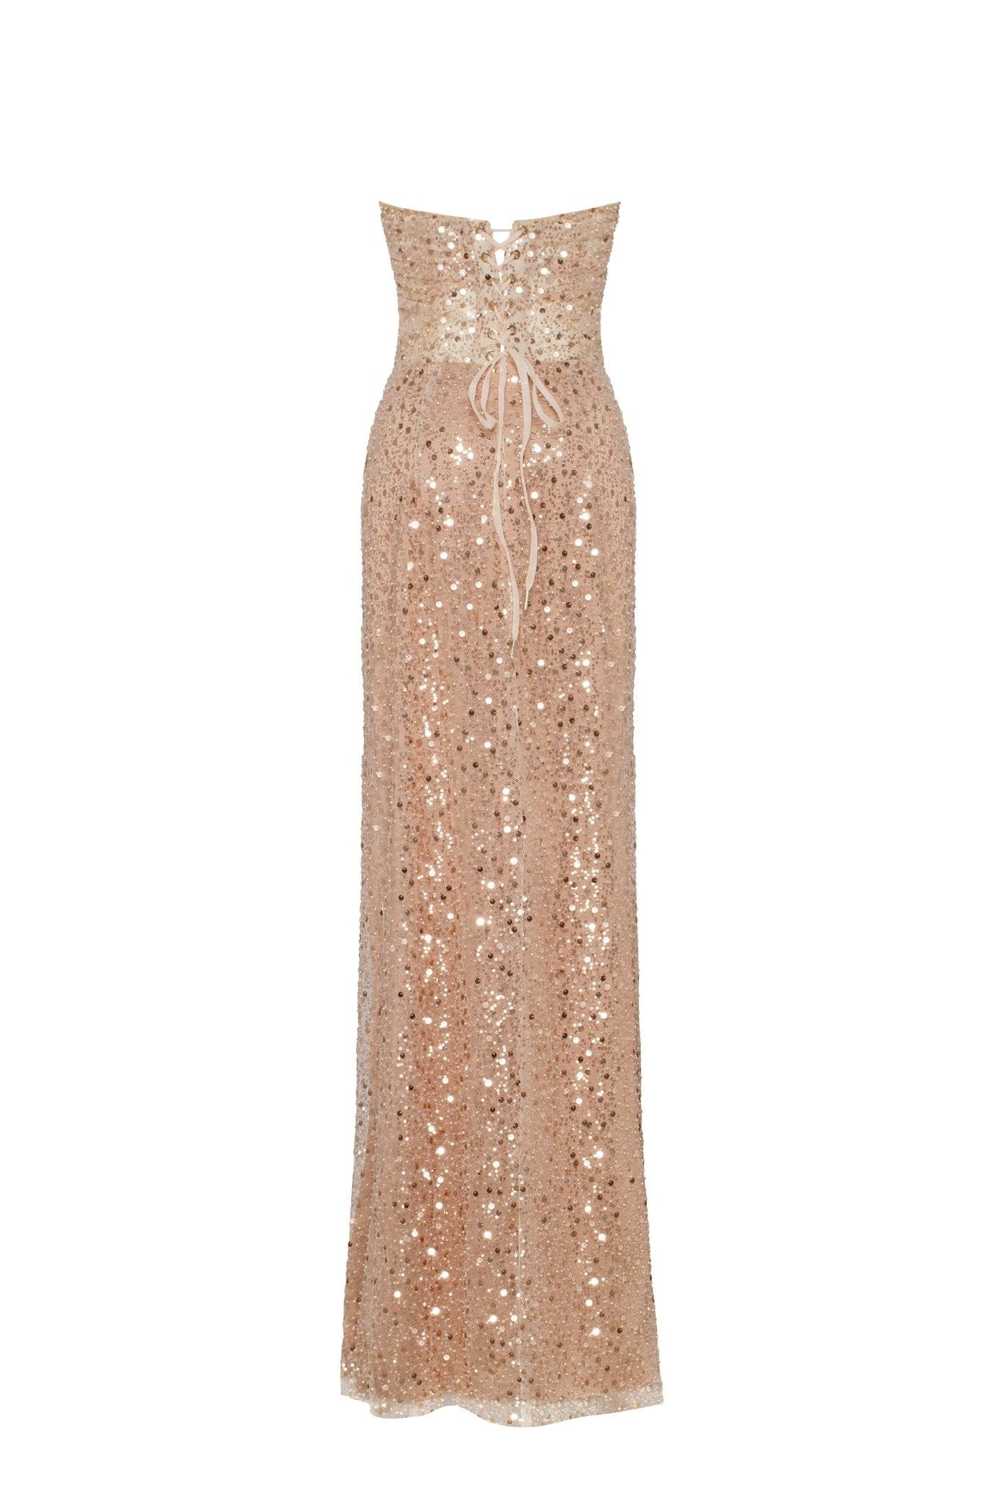 Milla Radiant maxi dress in gold - image 3